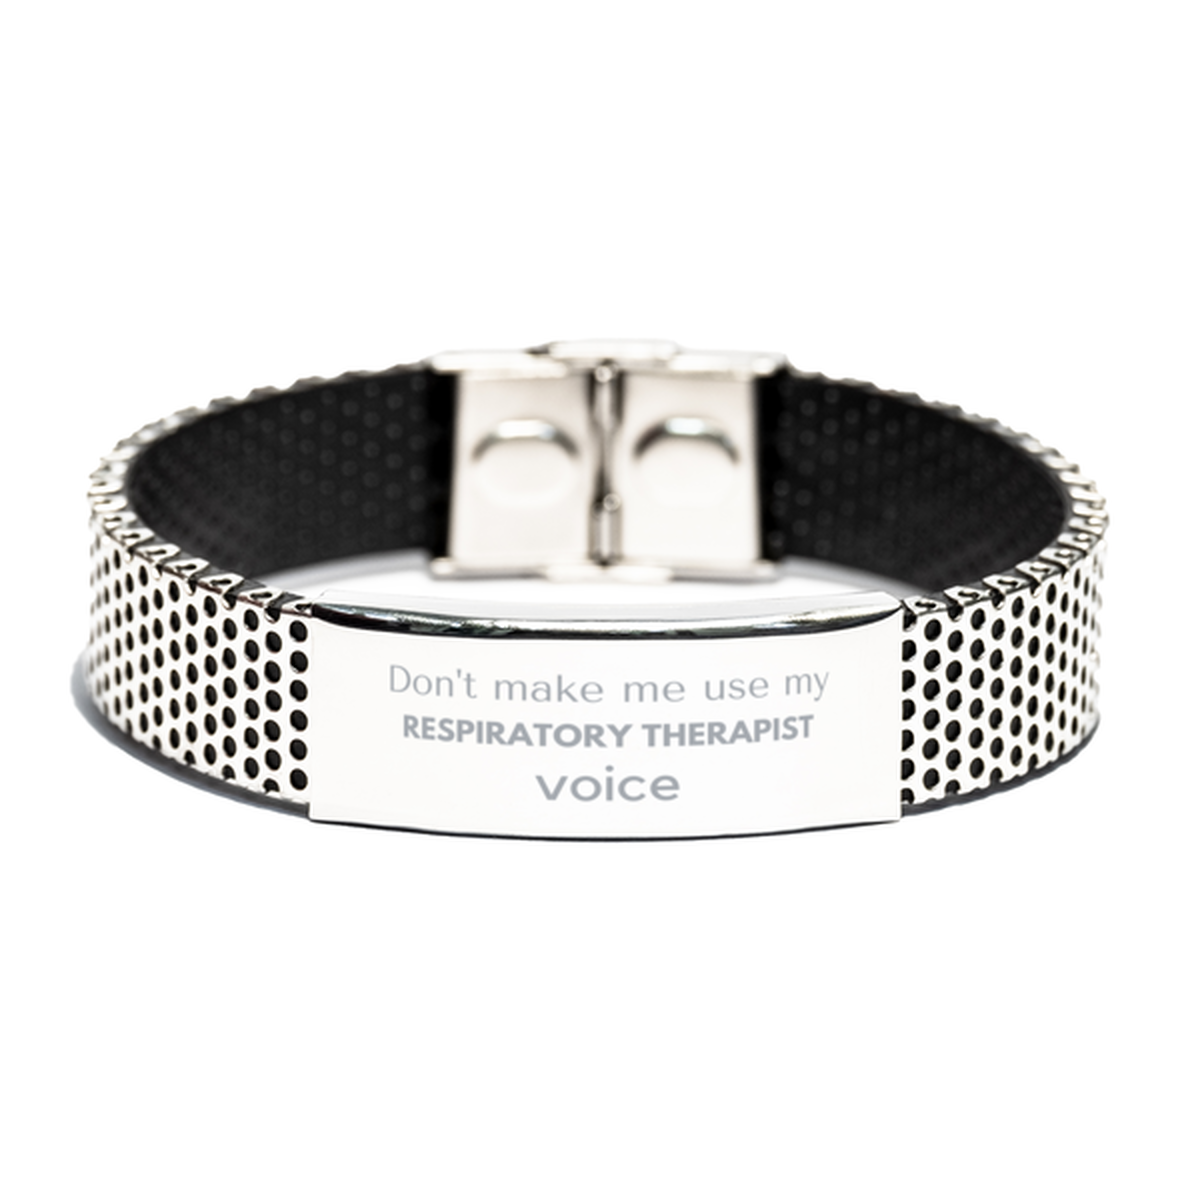 Don't make me use my Respiratory Therapist voice, Sarcasm Respiratory Therapist Gifts, Christmas Respiratory Therapist Stainless Steel Bracelet Birthday Unique Gifts For Respiratory Therapist Coworkers, Men, Women, Colleague, Friends